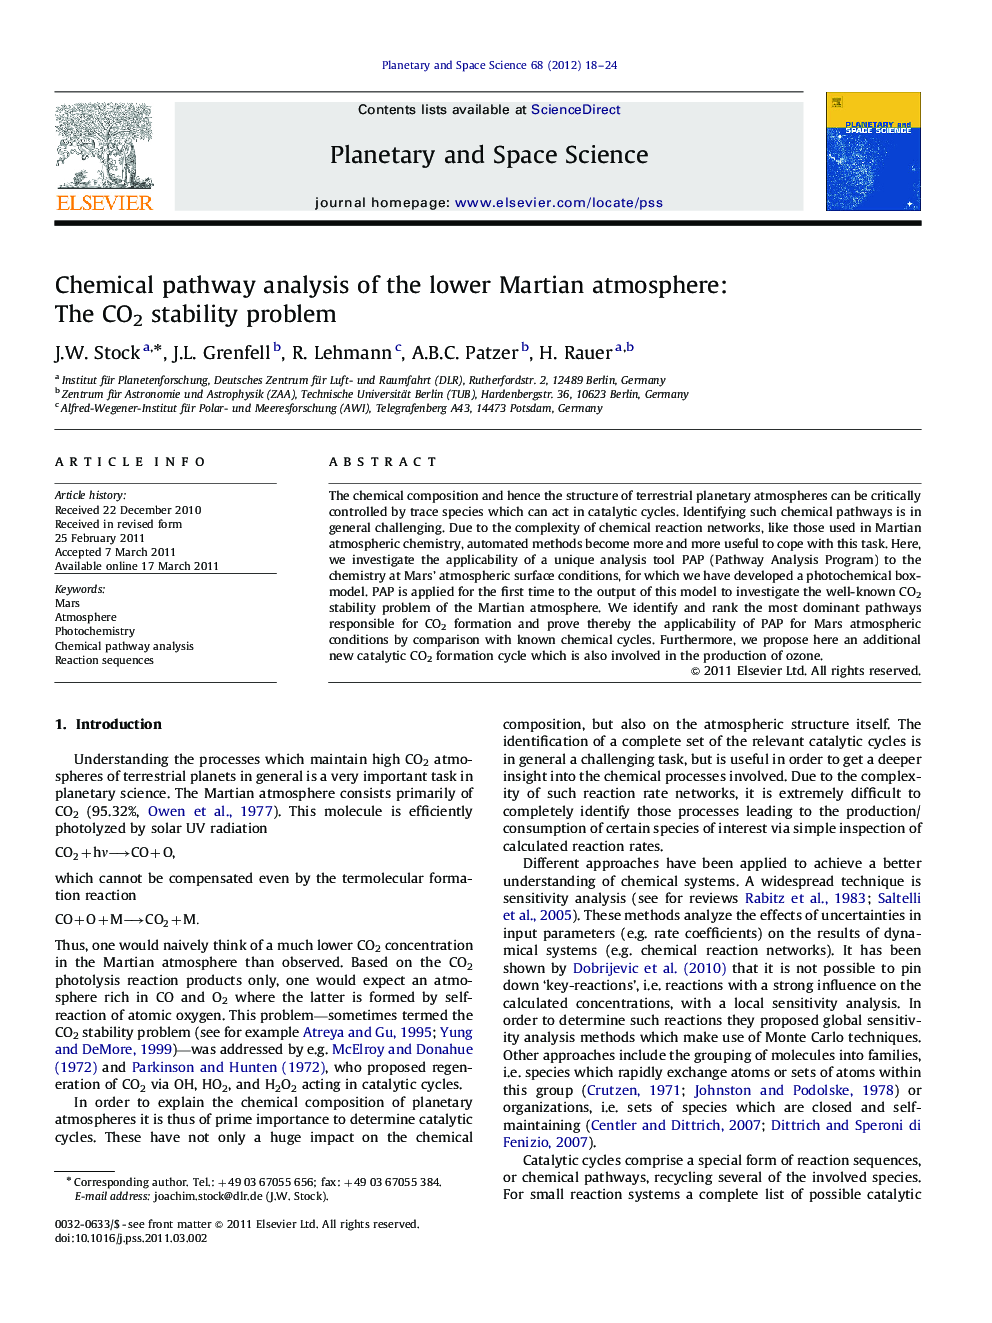 Chemical pathway analysis of the lower Martian atmosphere: The CO2 stability problem